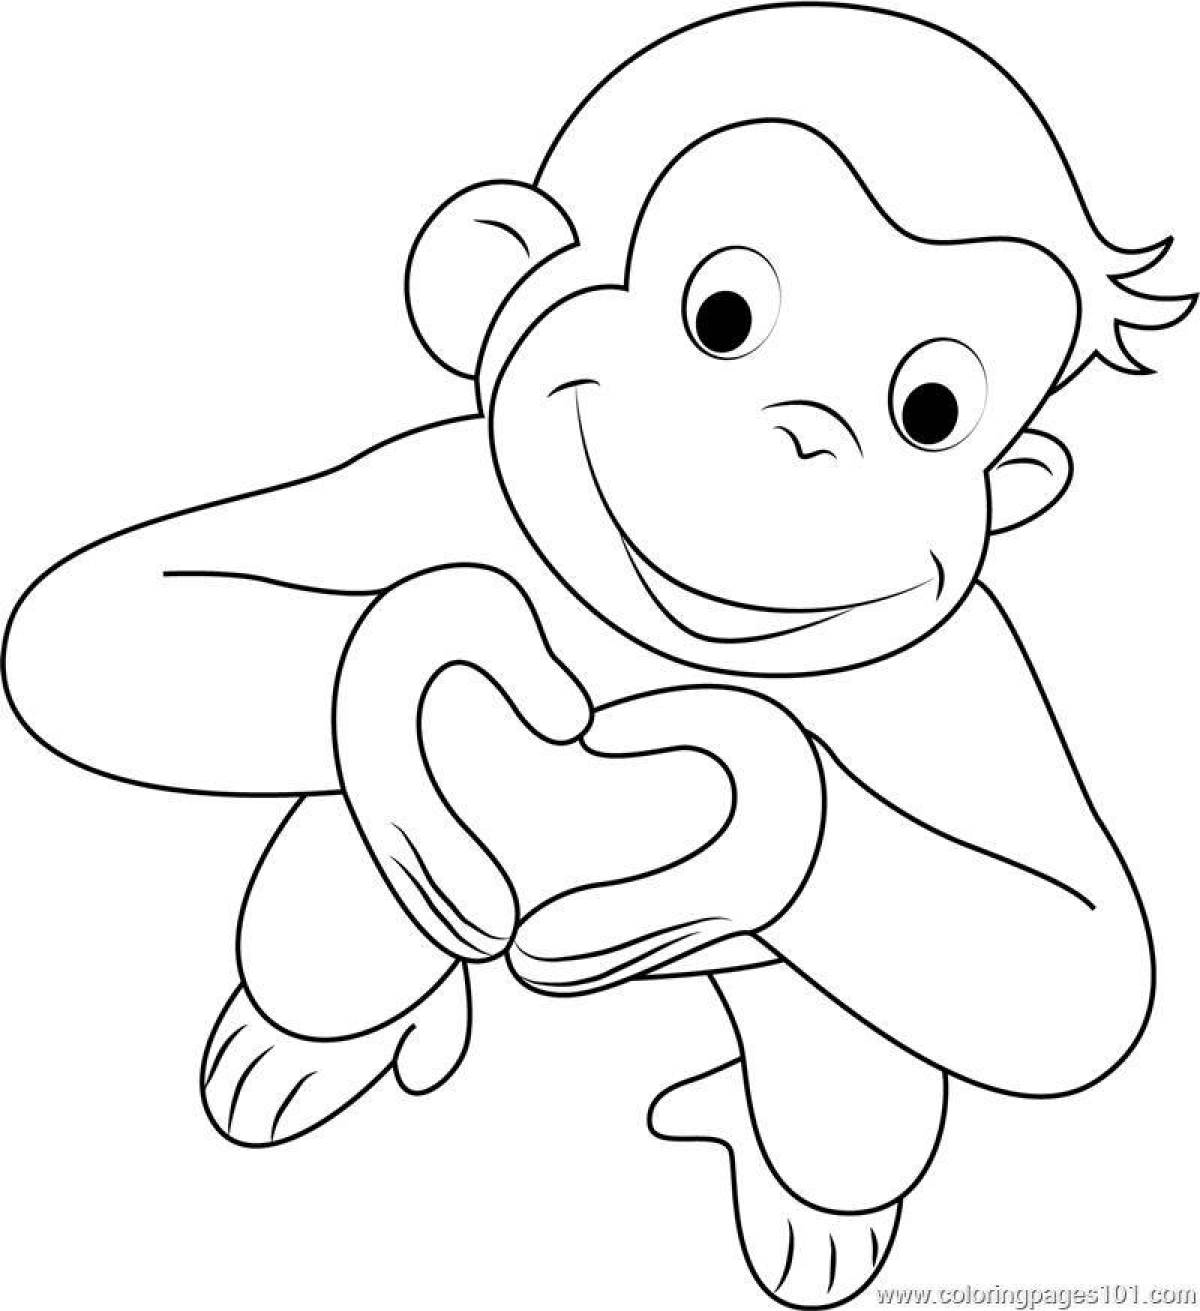 Cute monkey coloring book for kids